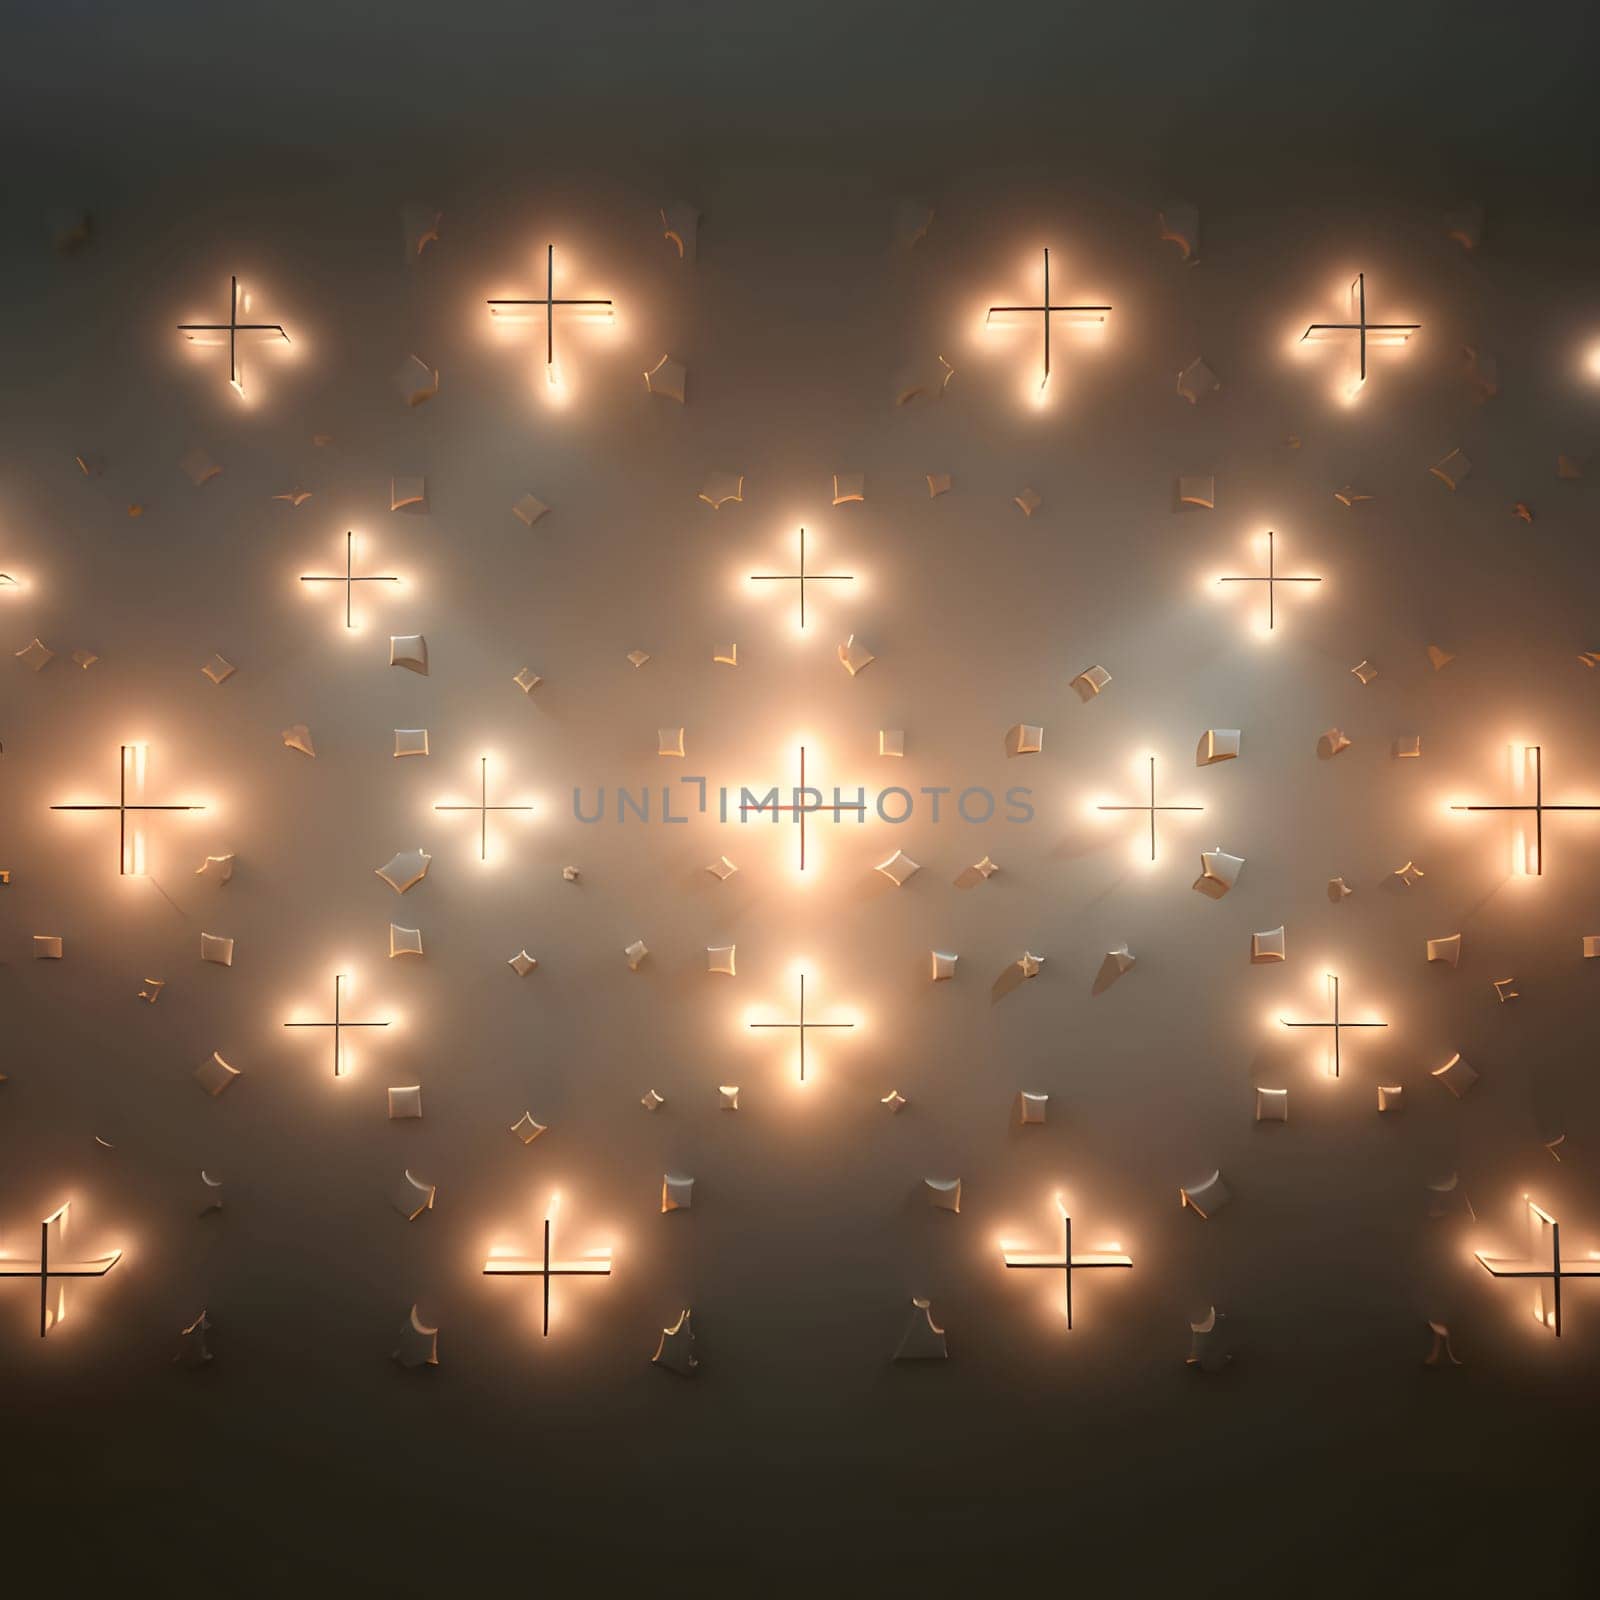 Patterns and banners backgrounds: Glowing christian cross on dark background. 3D illustration.